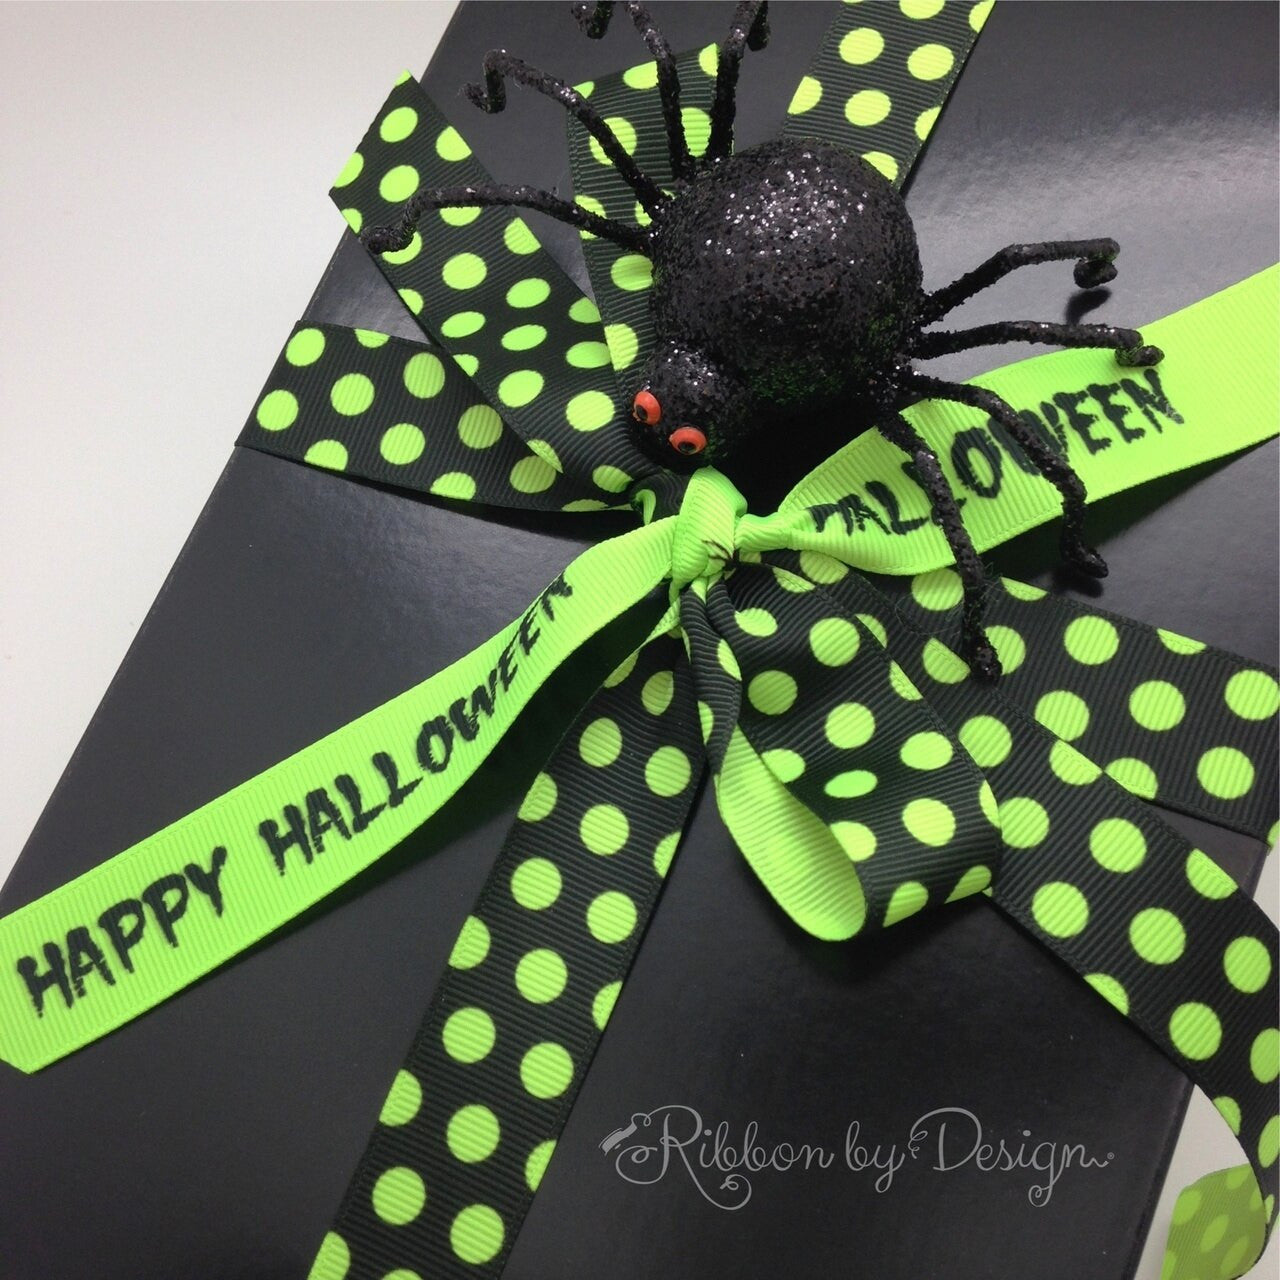 Combine our neon polka dots with our Happy Halloween on neon green for  a fun and not so scary Halloween treat box!